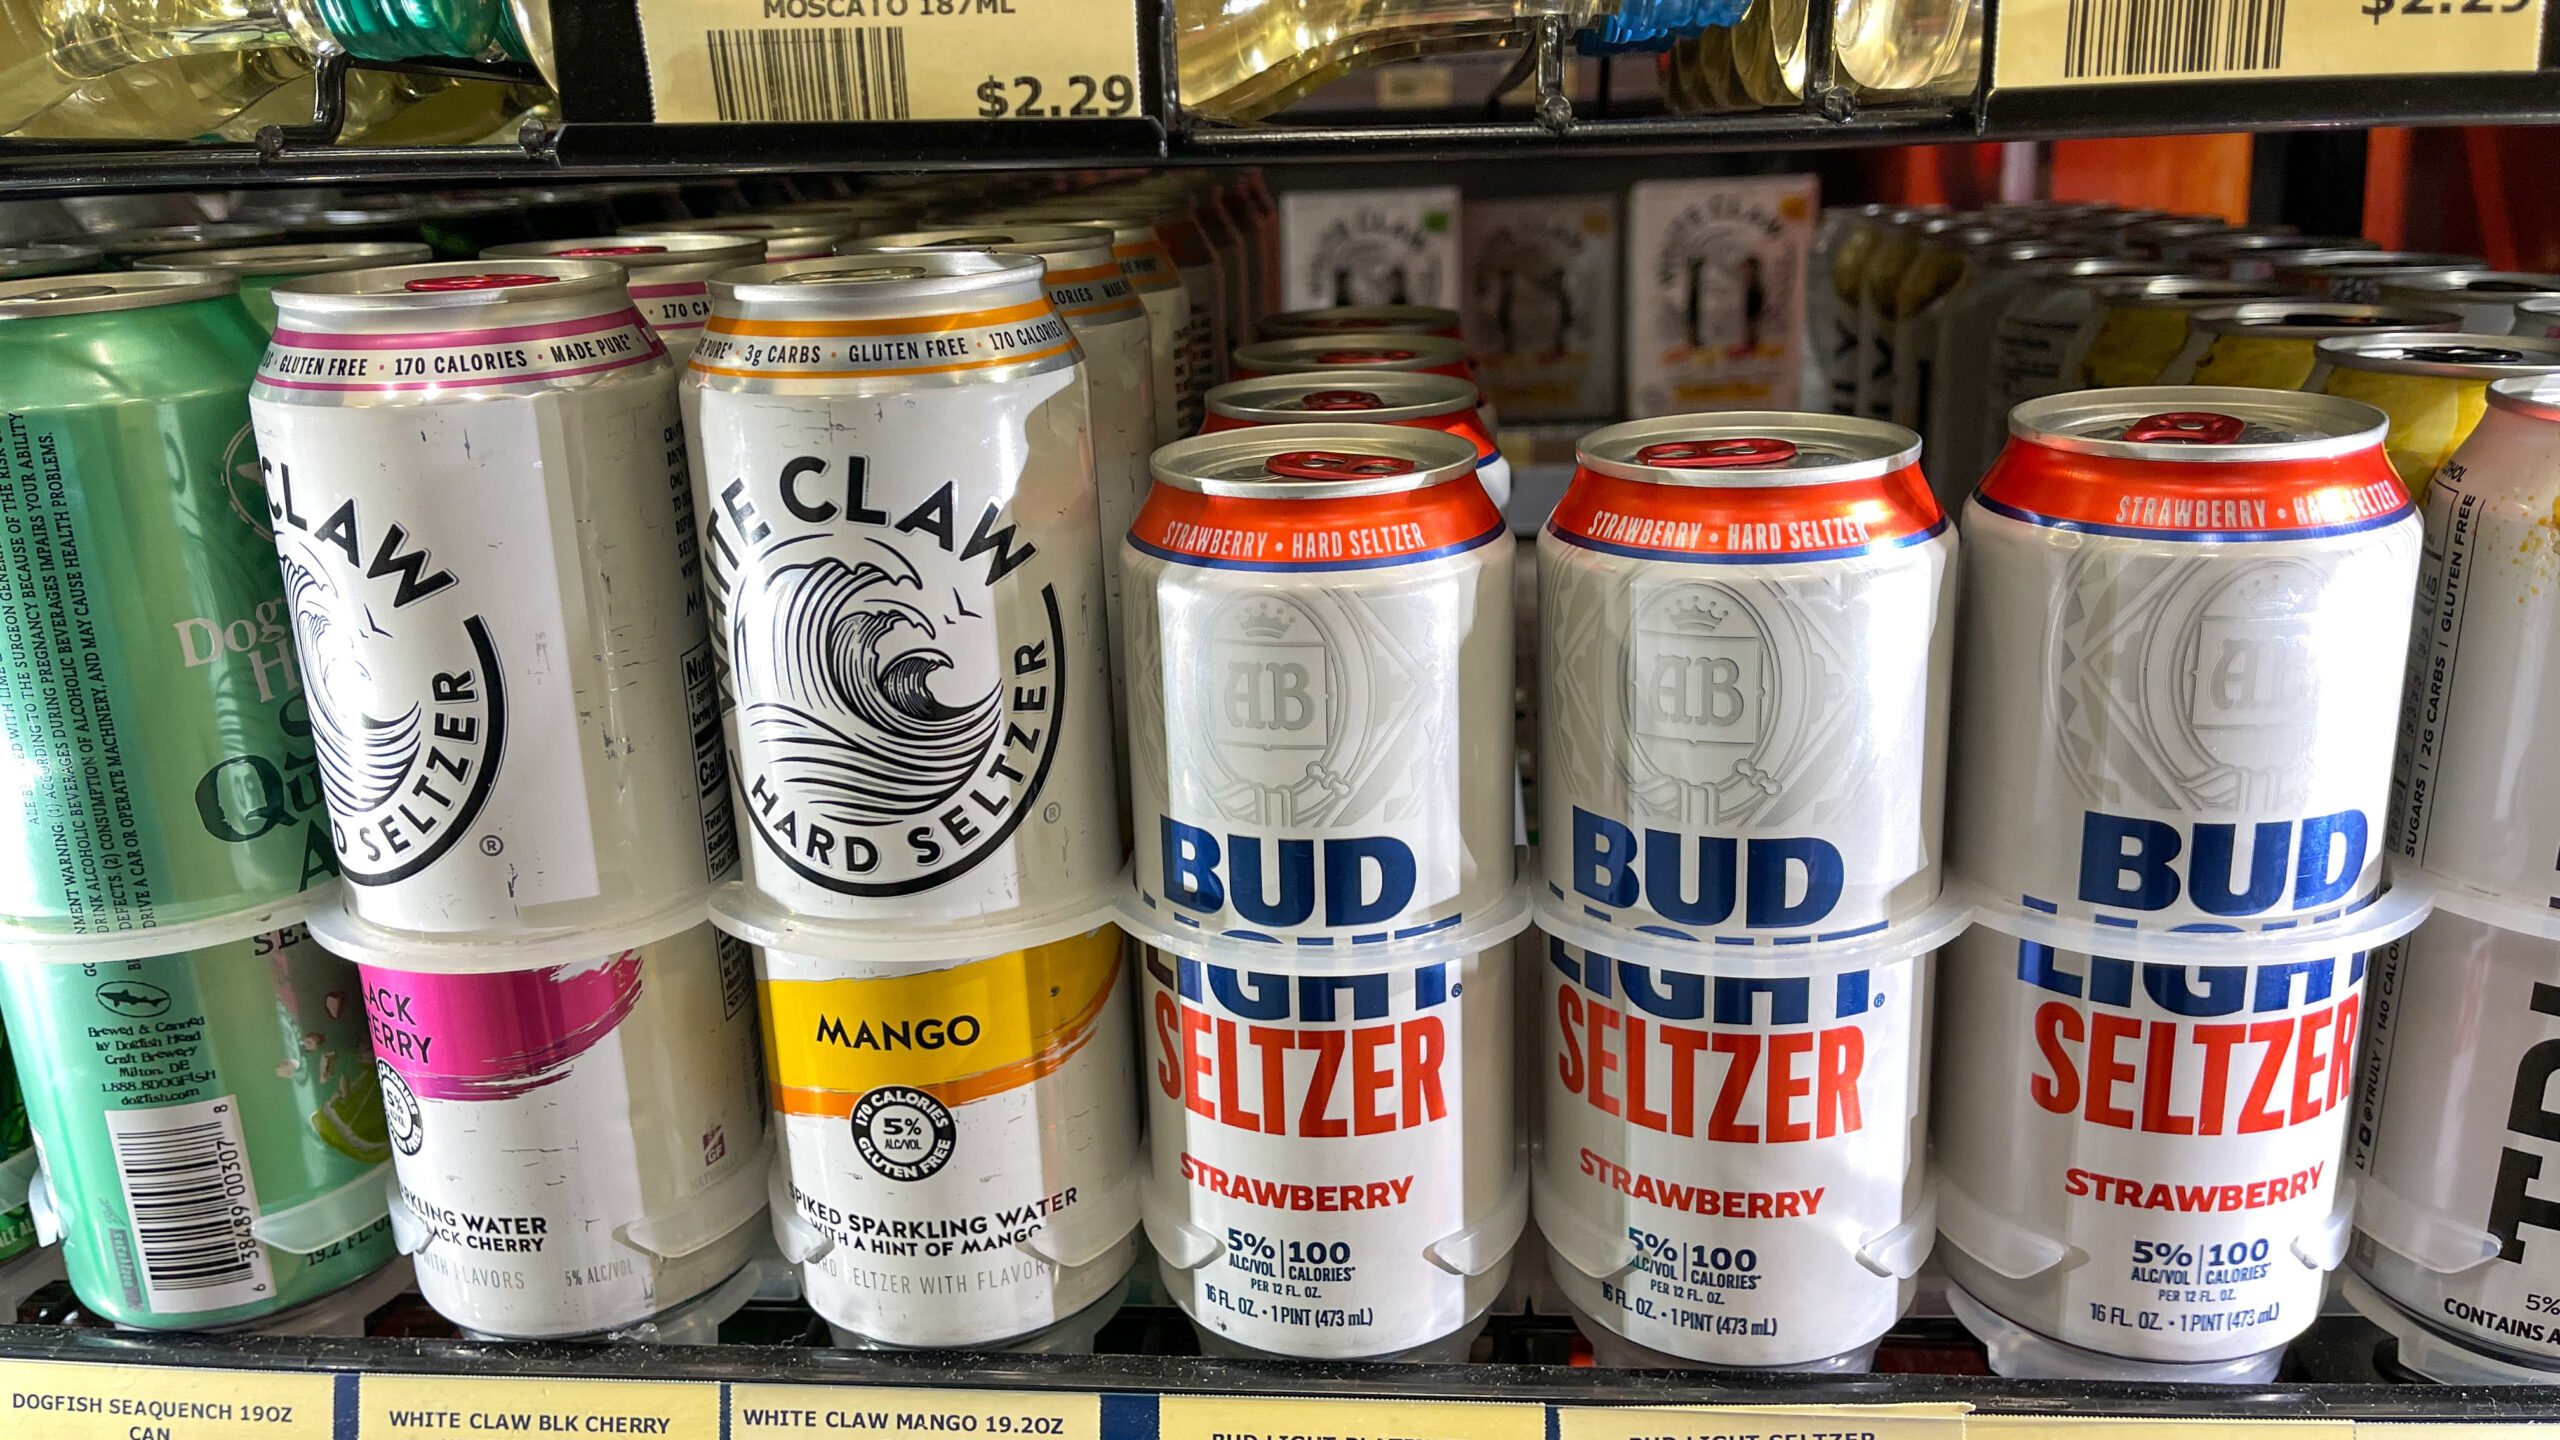 Hard Seltzers in display cooler at convenience store